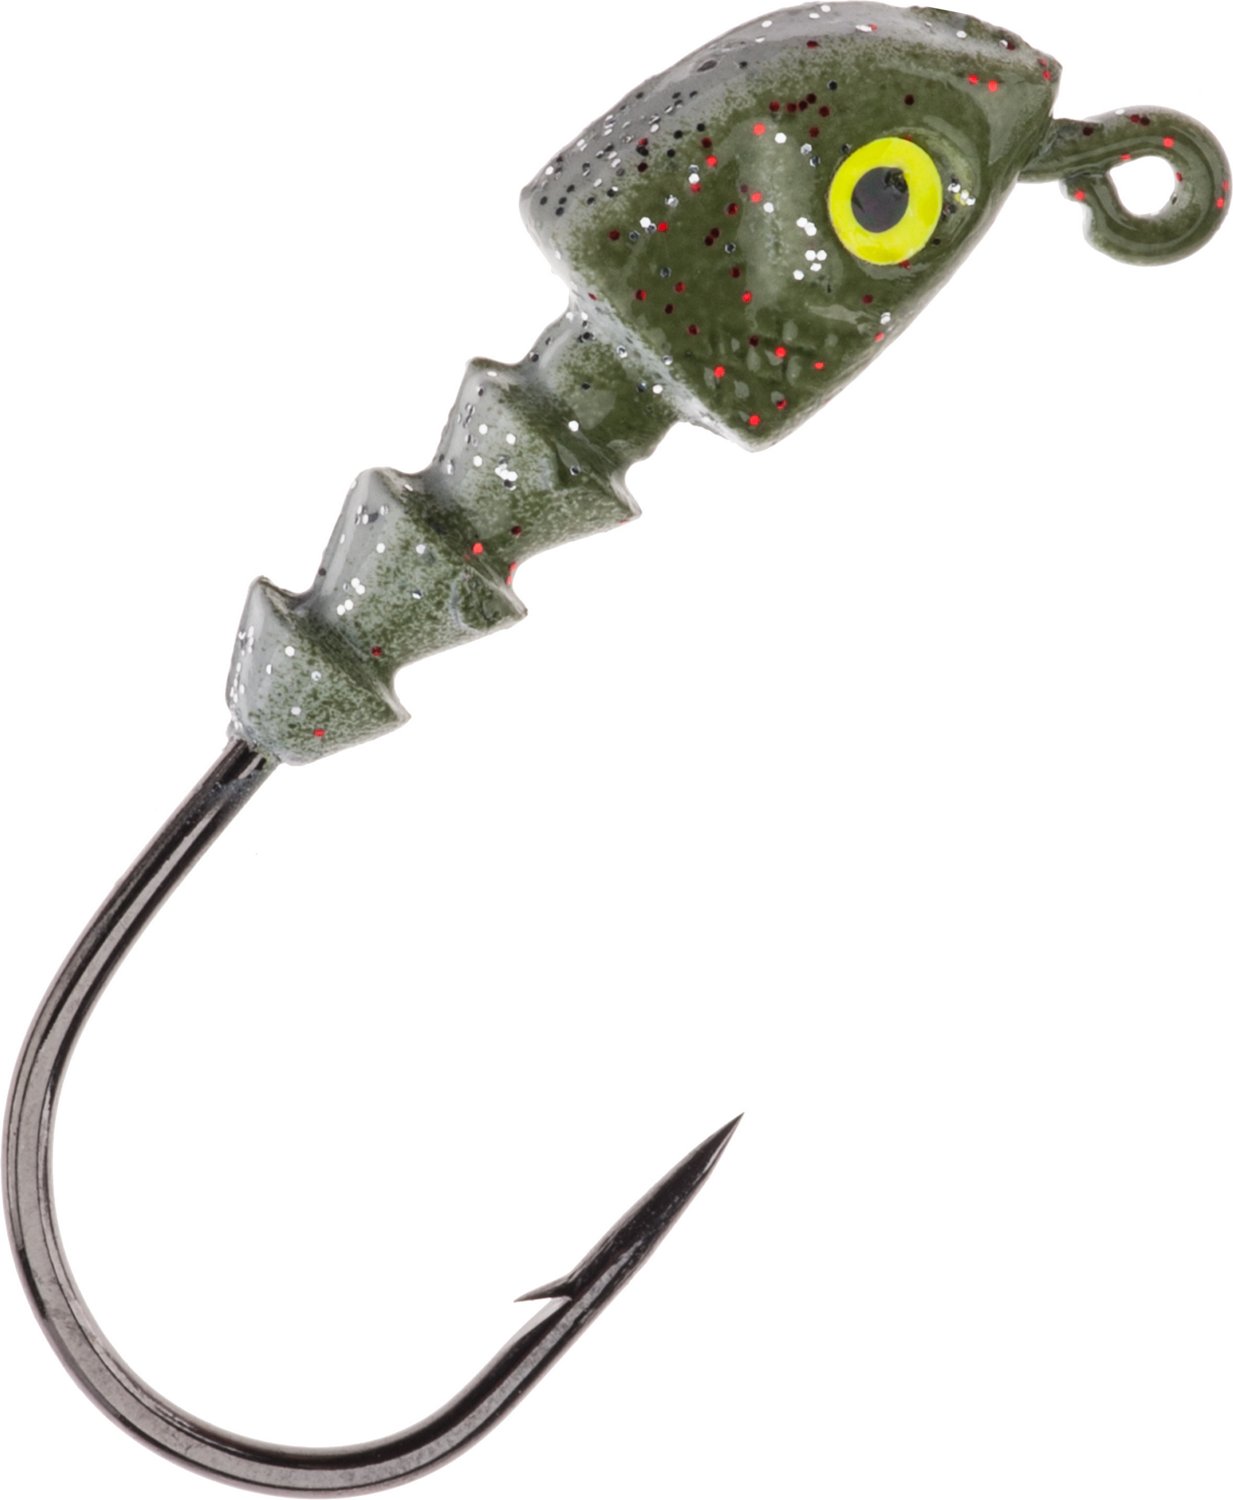 Bass Assassin Lures Saltwater Shad Assassin 5 Lure 8-Pack